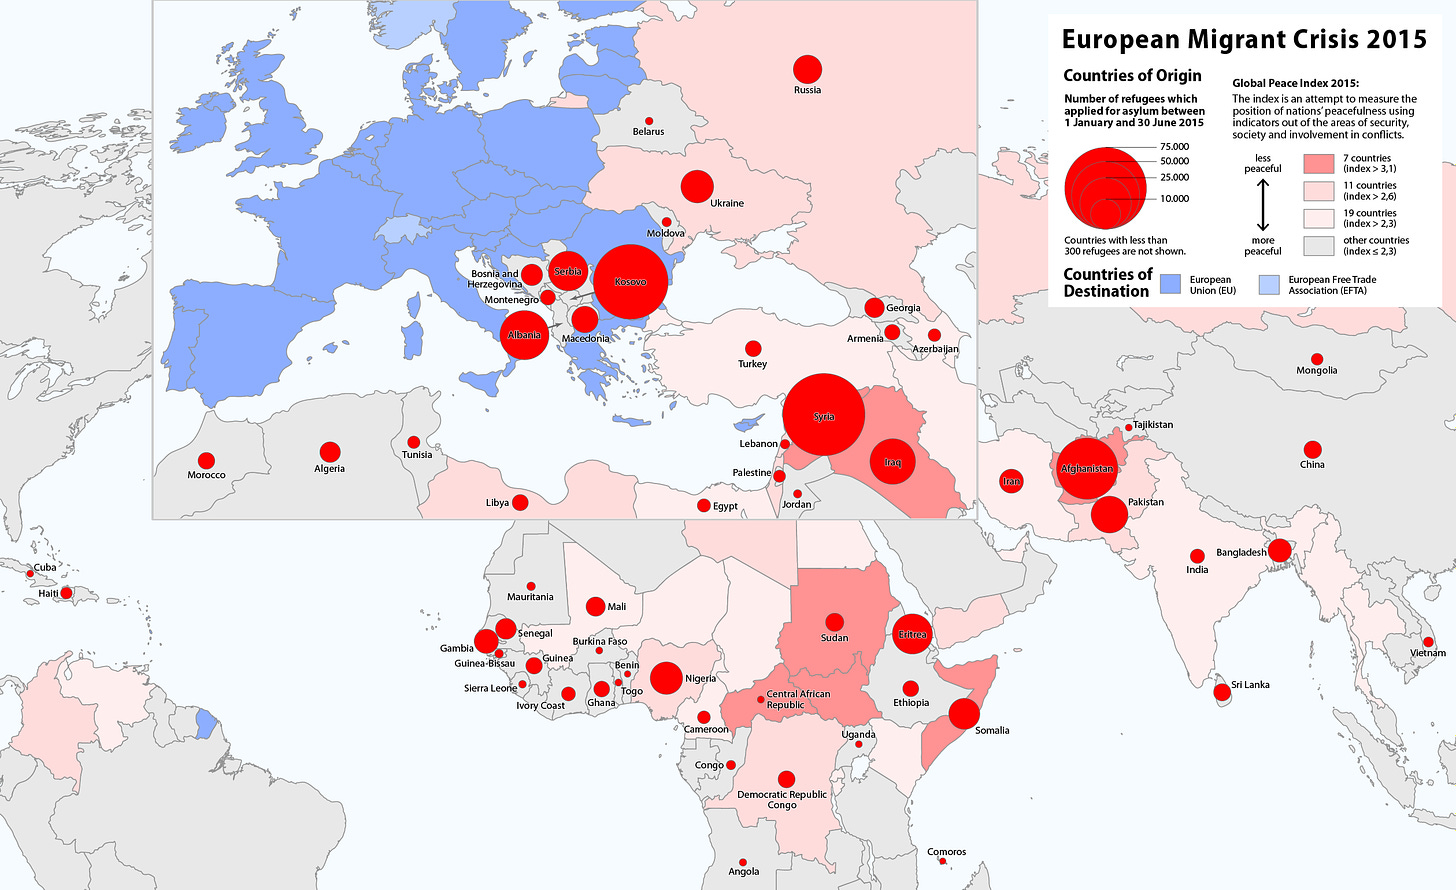 File:Map of the European Migrant Crisis 2015 - Asylum applicants' countries  of origin.png - Wikimedia Commons